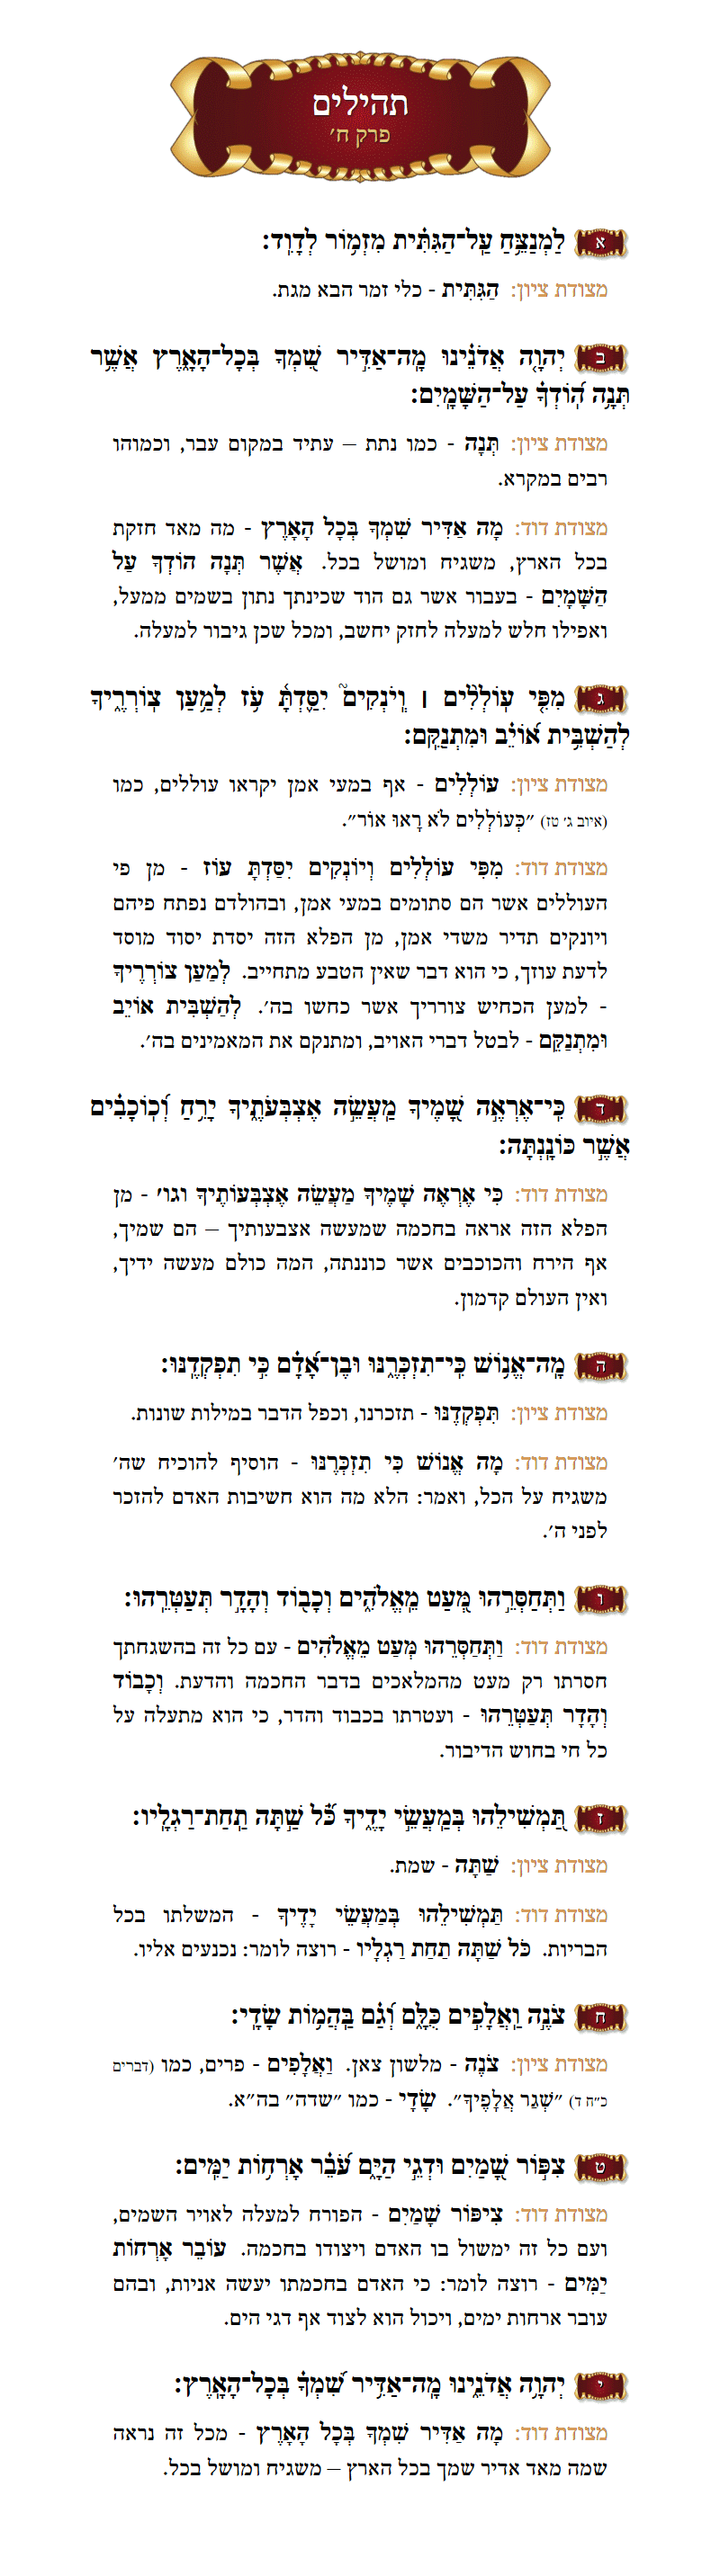 Sefer Tehillim Chapter 80 with commentary